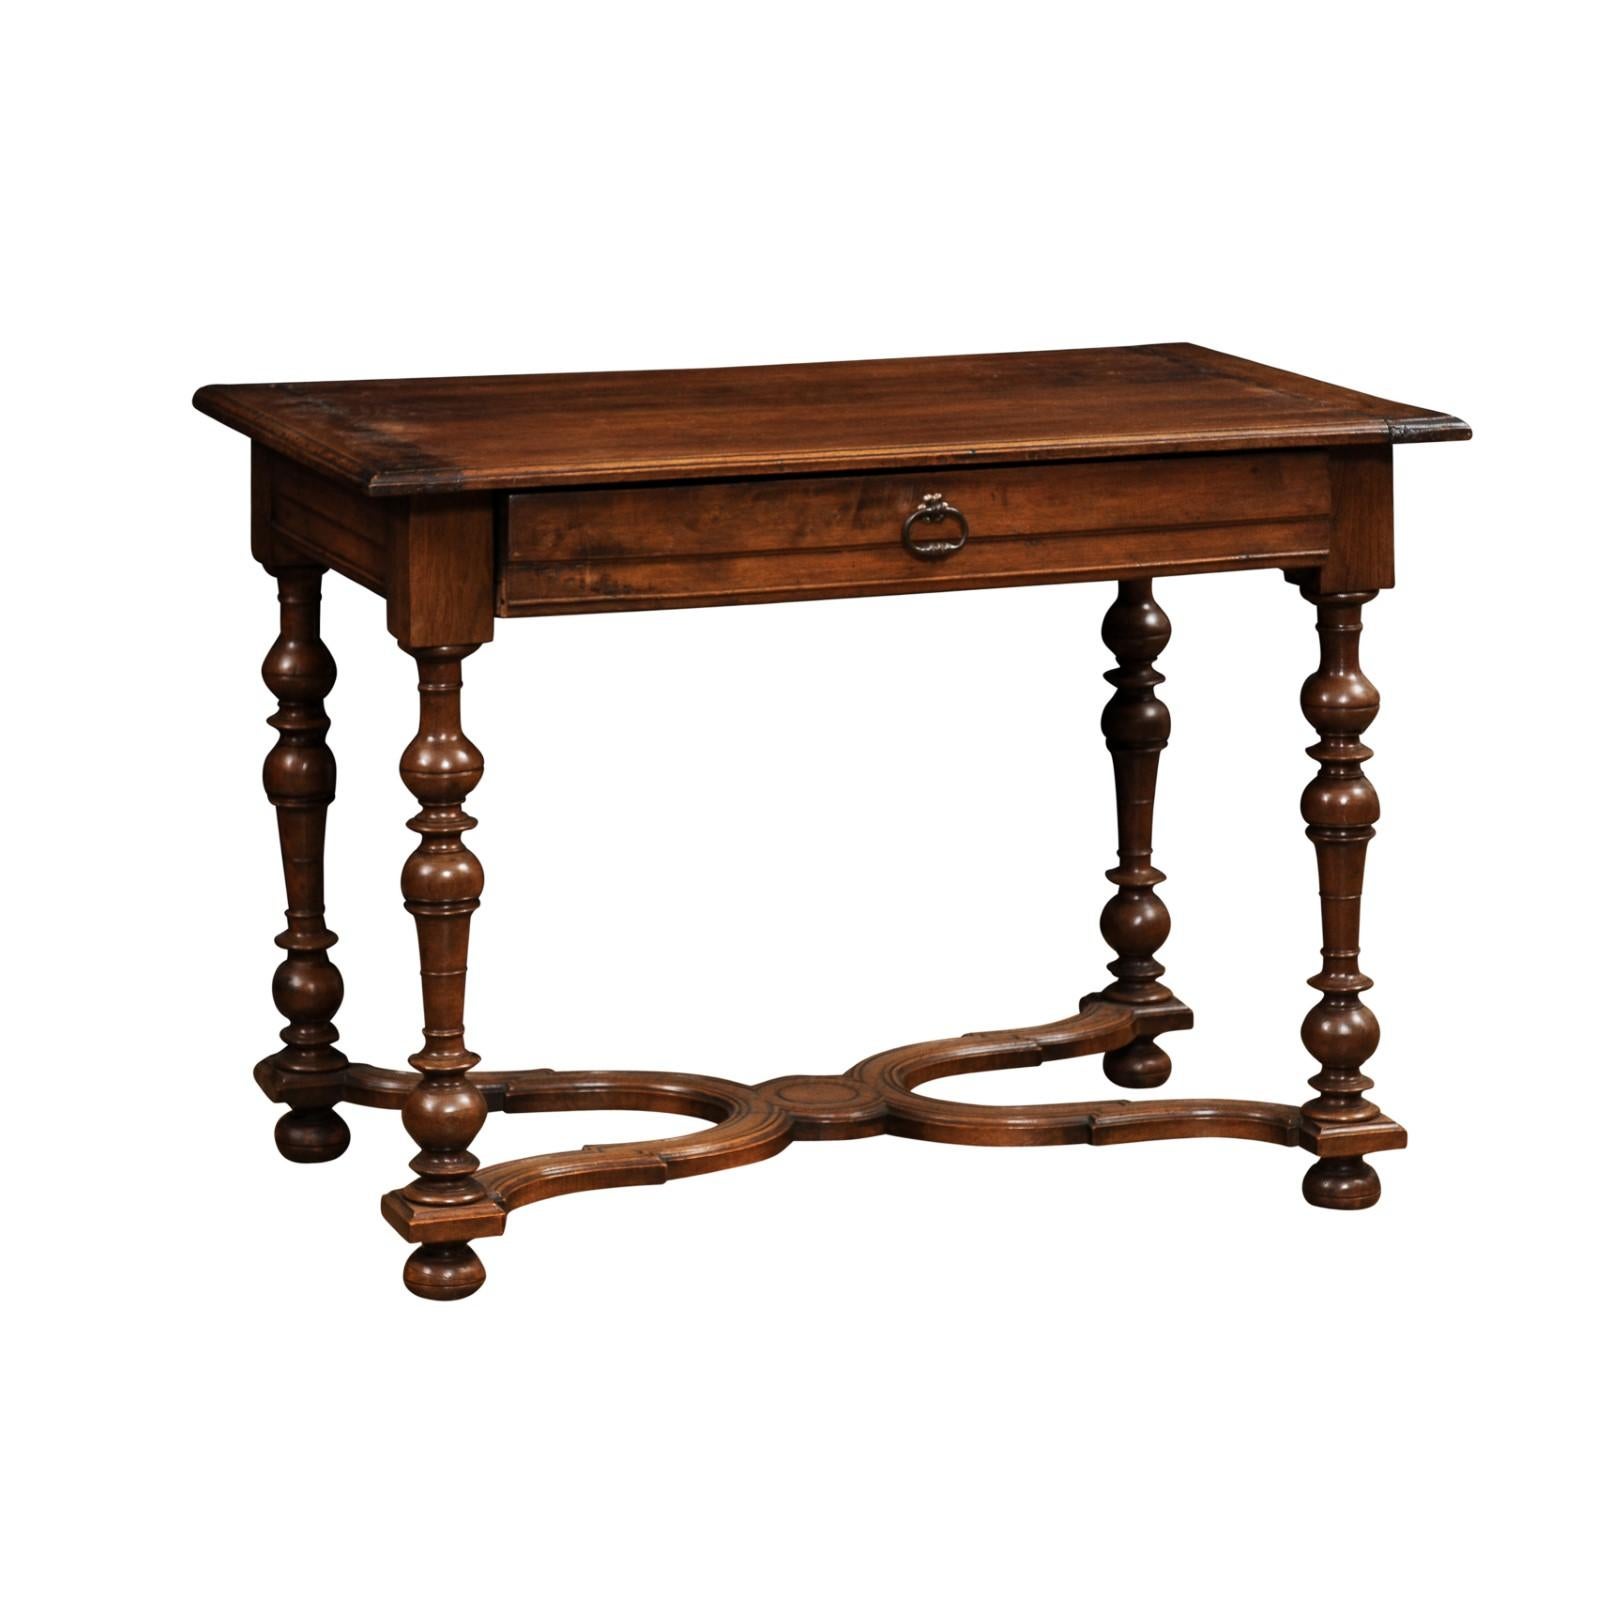 A French Louis XIII style walnut side table from the late 19th century, with baluster legs, single drawer and X-Form cross stretcher. Created in France during the last quarter of the 19th century, this walnut side table showcases the stylistic